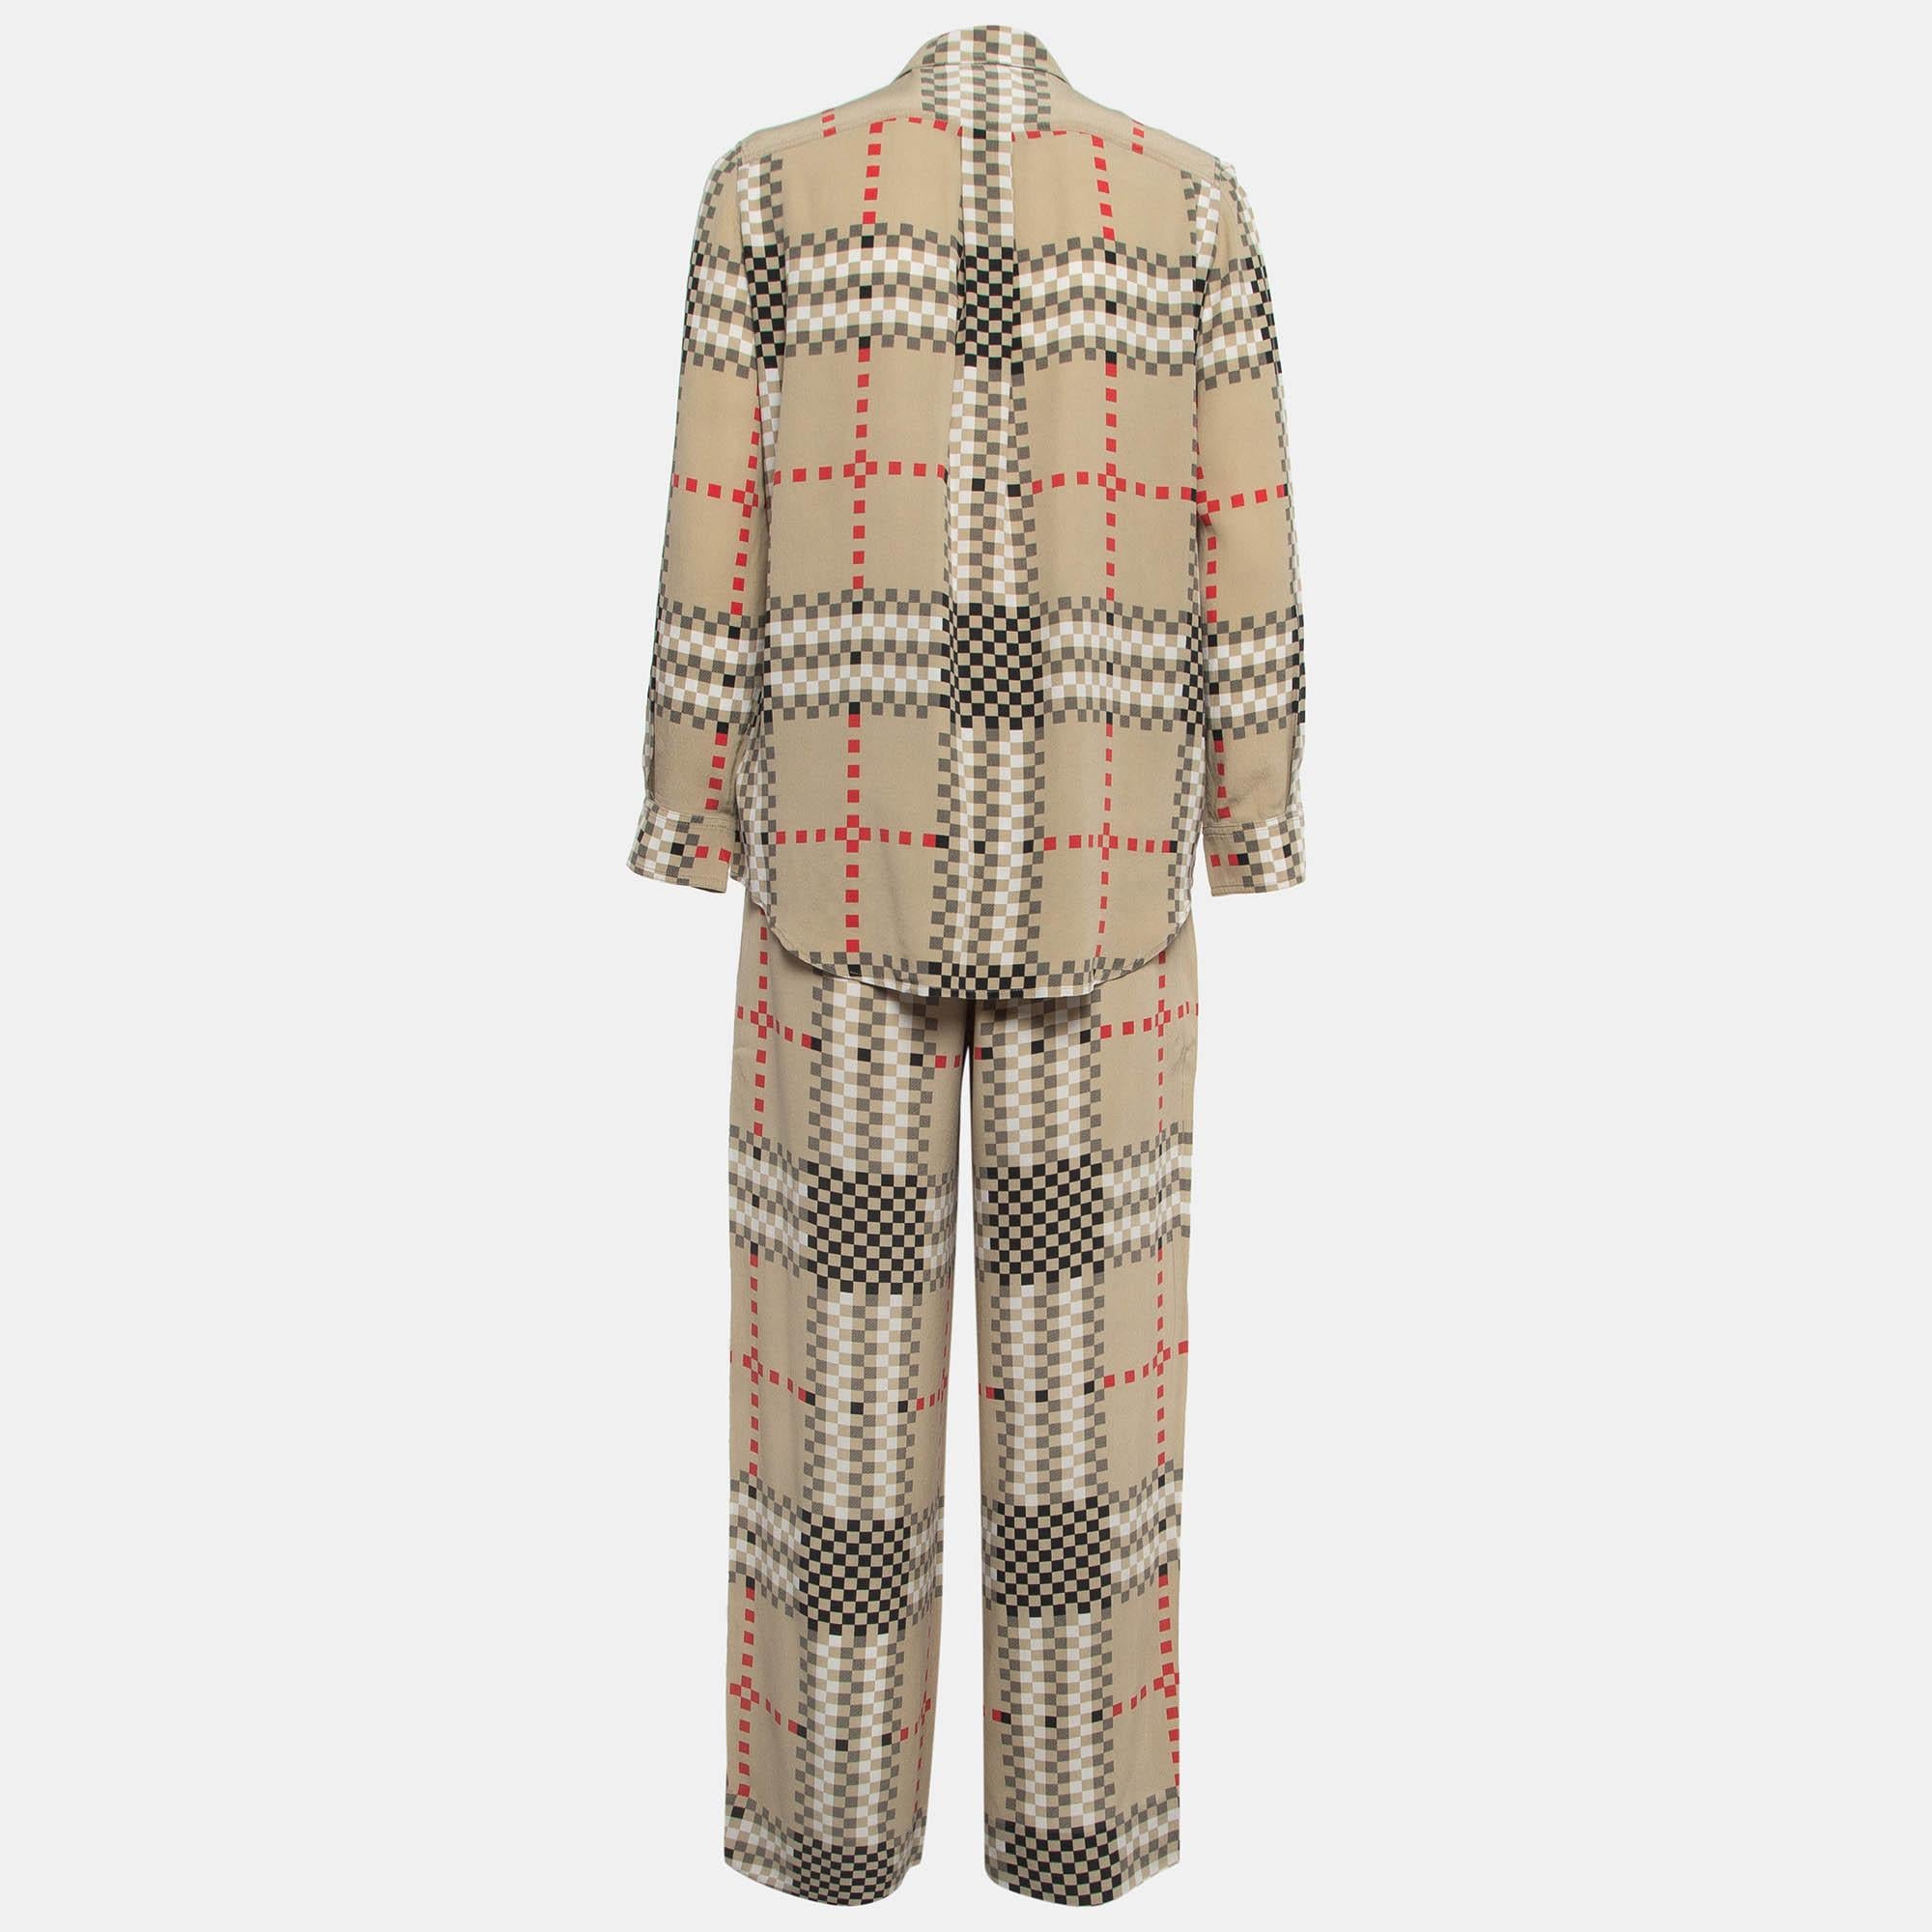 Crafted from sumptuous silk, the Burberry set exudes timeless charm. The shirt boasts a refined pixel check pattern, while the pants complement with a matching design. Effortlessly stylish, this ensemble epitomizes Burberry's signature aesthetic,